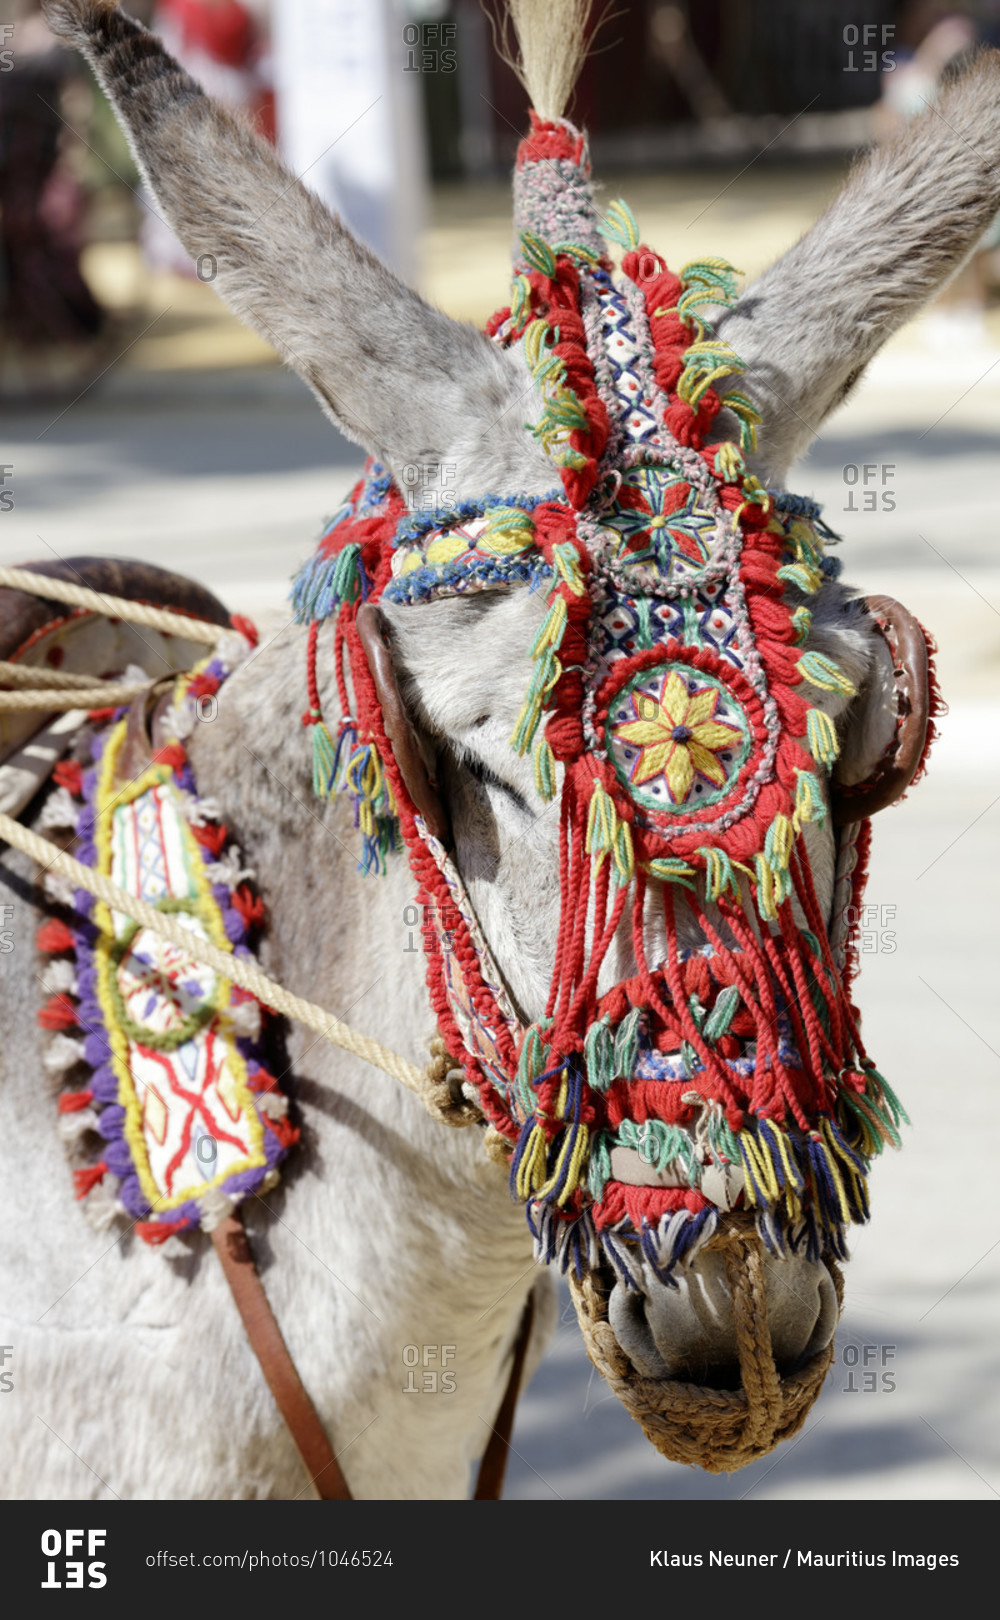 Donkey with halter, festival, traditional costume, tradition, culture, customs, el Puerto de Santa maria, andalusia, Spain, Europe